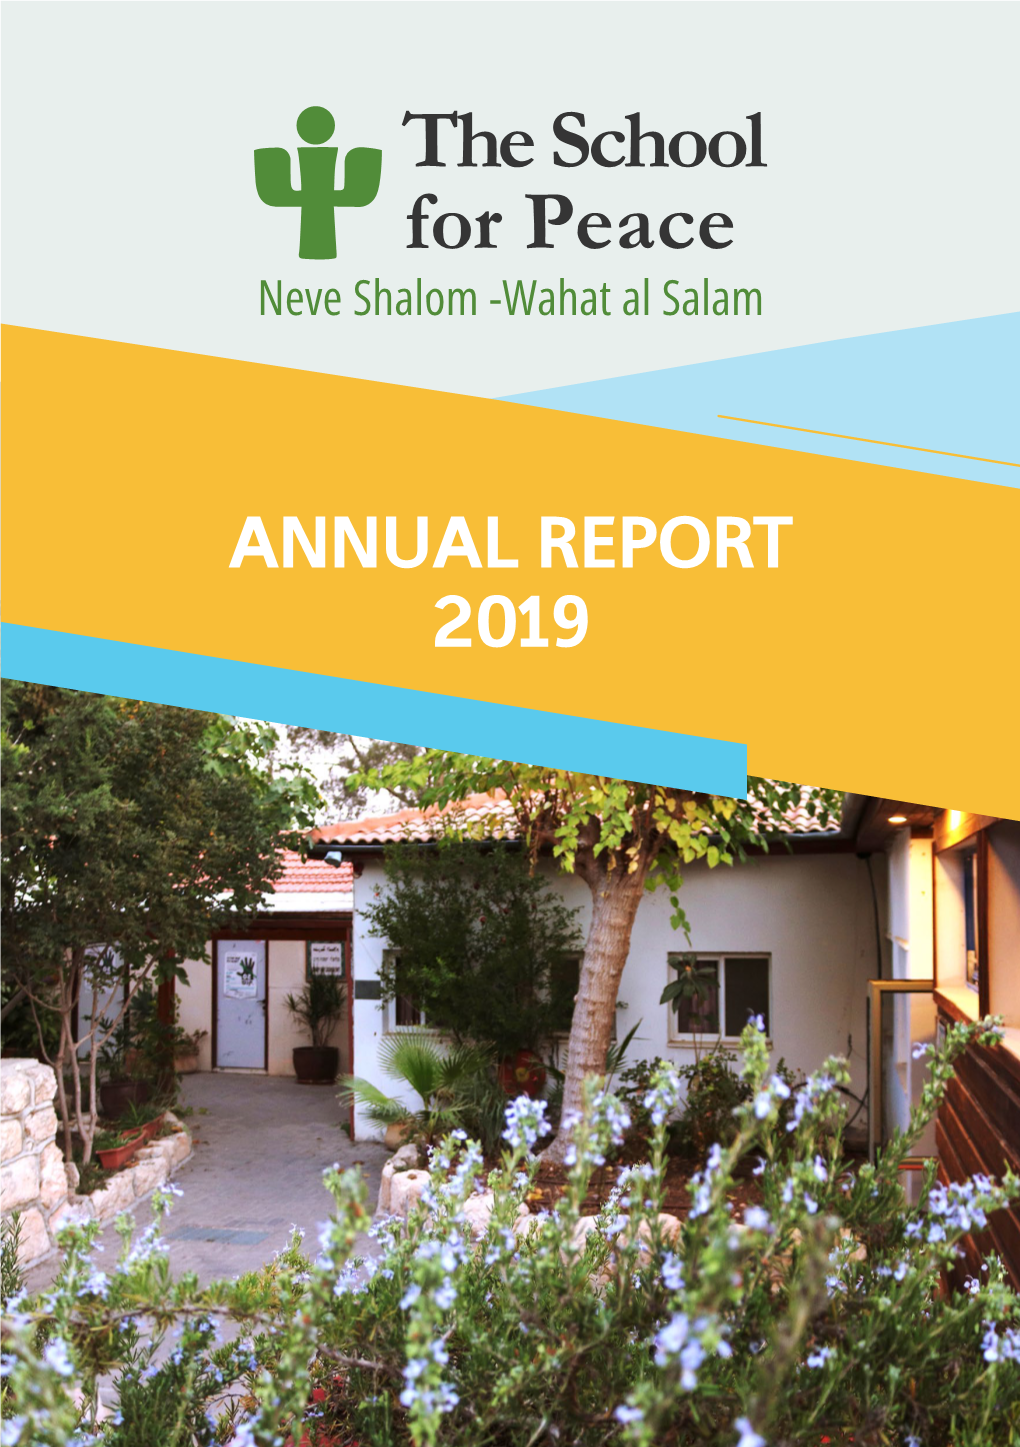 ANNUAL REPORT 2019 from Dr